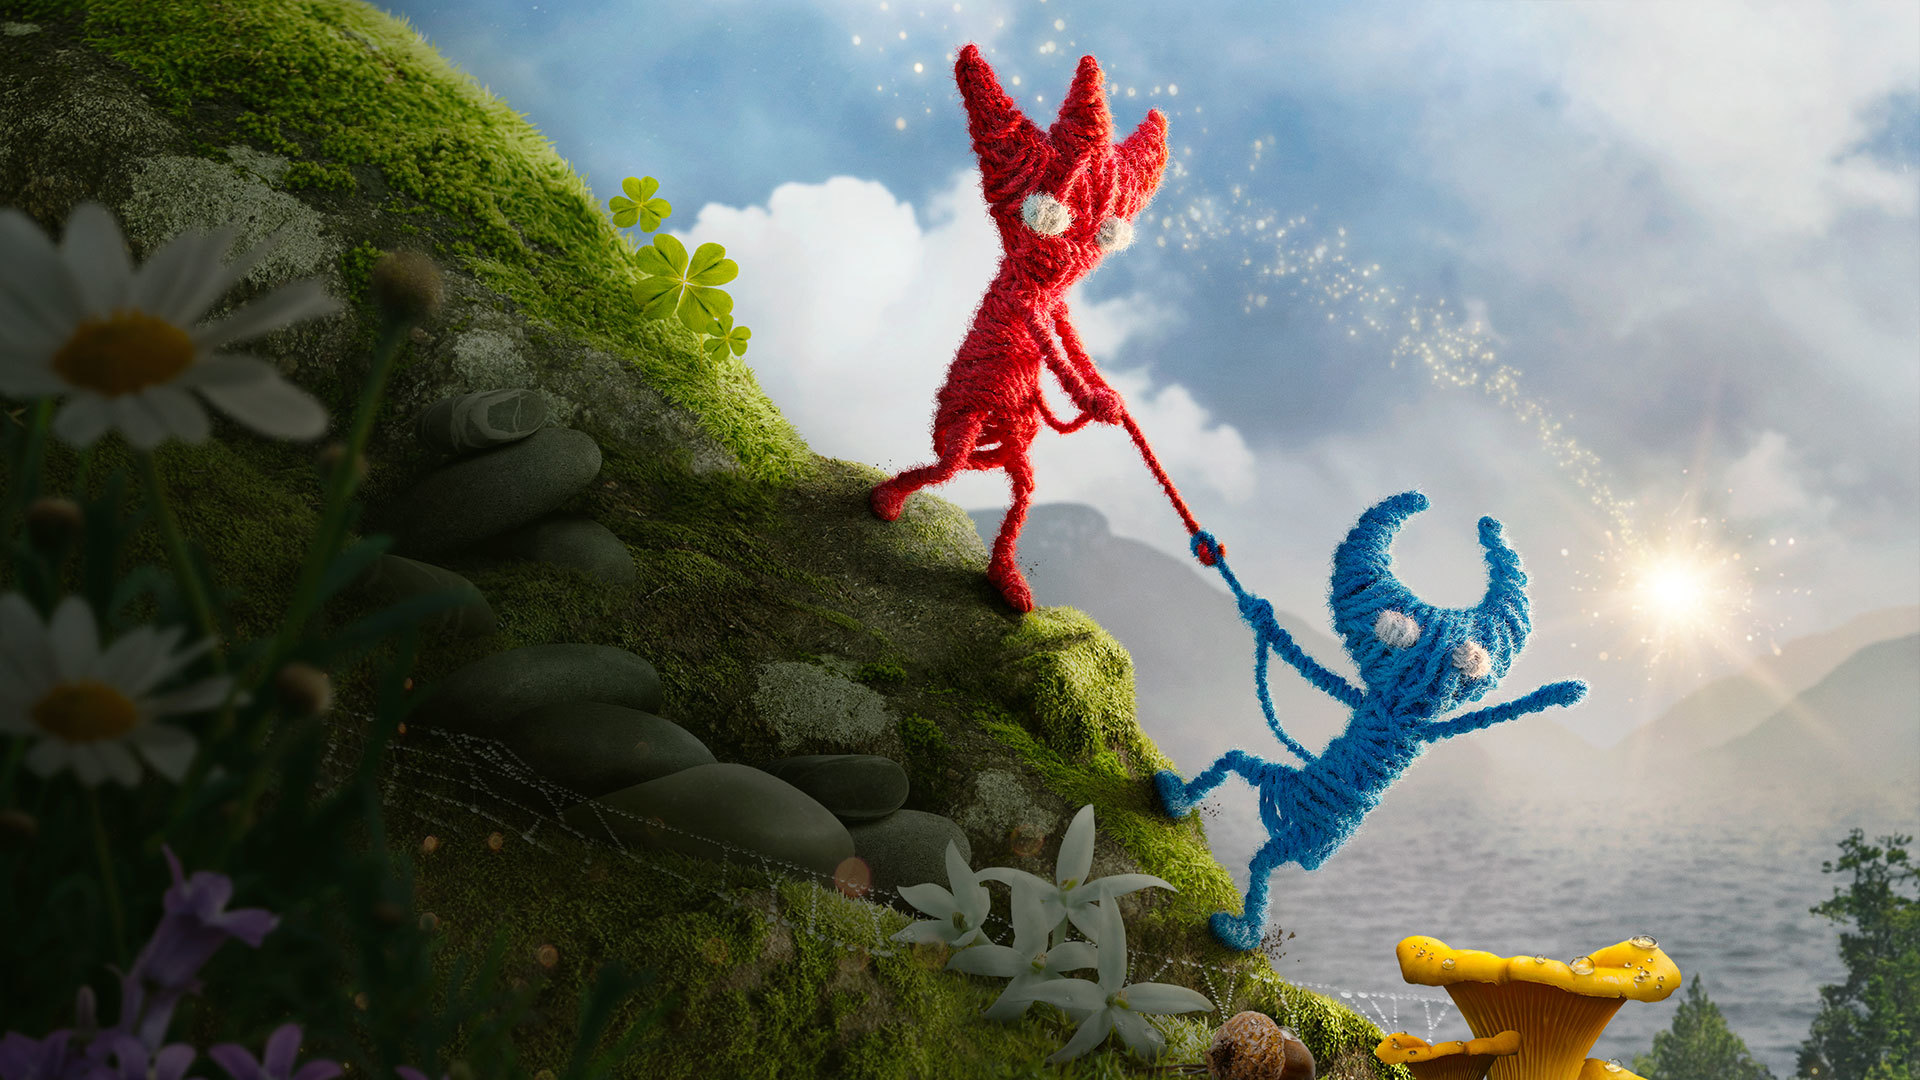 Unravel 2 has been officially revealed and then immediately released for  both PC and consoles - Gamesear